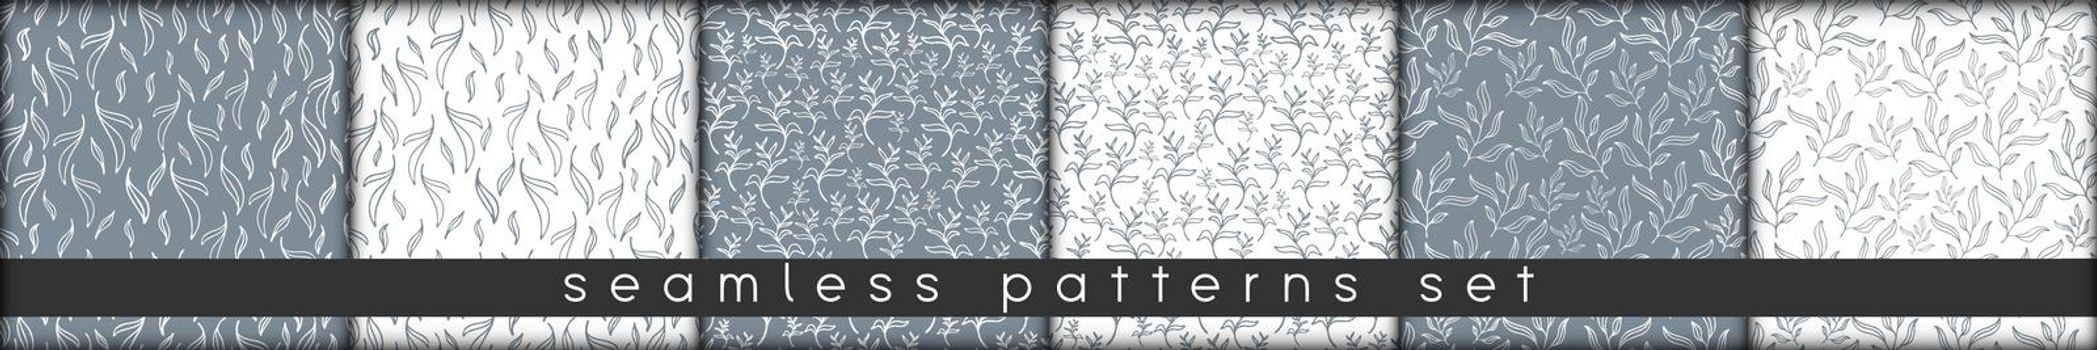 doodle seamless patterns of natural eco hand drawn lineart minimalist elements. monochrome design for packaging paper wrapping fabric textile.